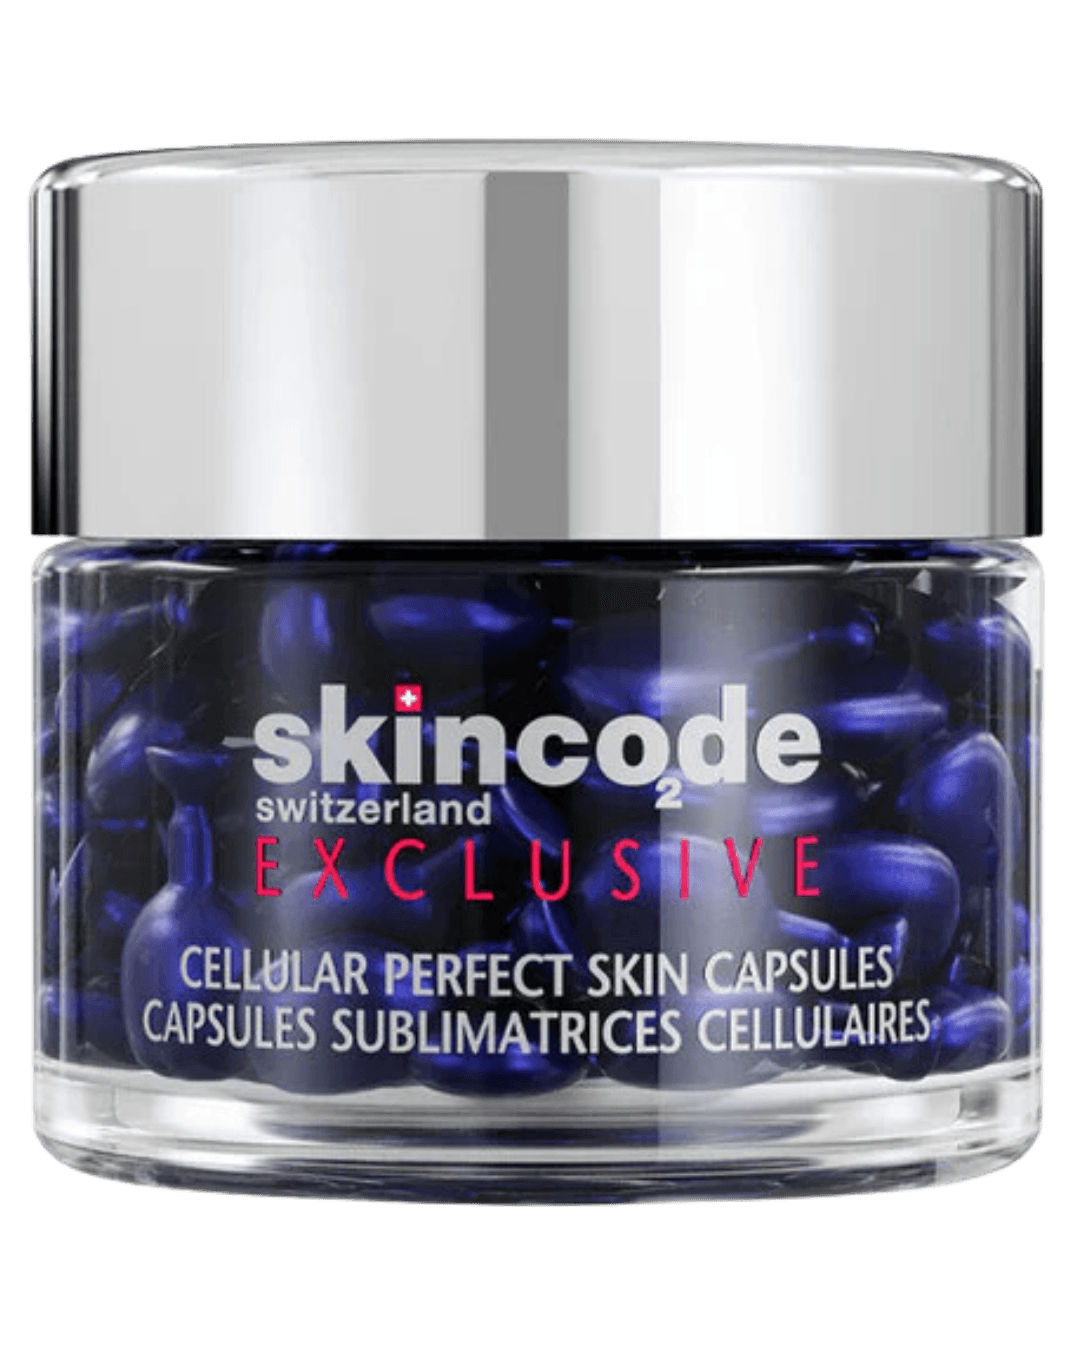 Daily Vanity Beauty Awards 2024 Best Skincare SKINCODE Cellular Skin Perfect Capsules Voted By Beauty Experts